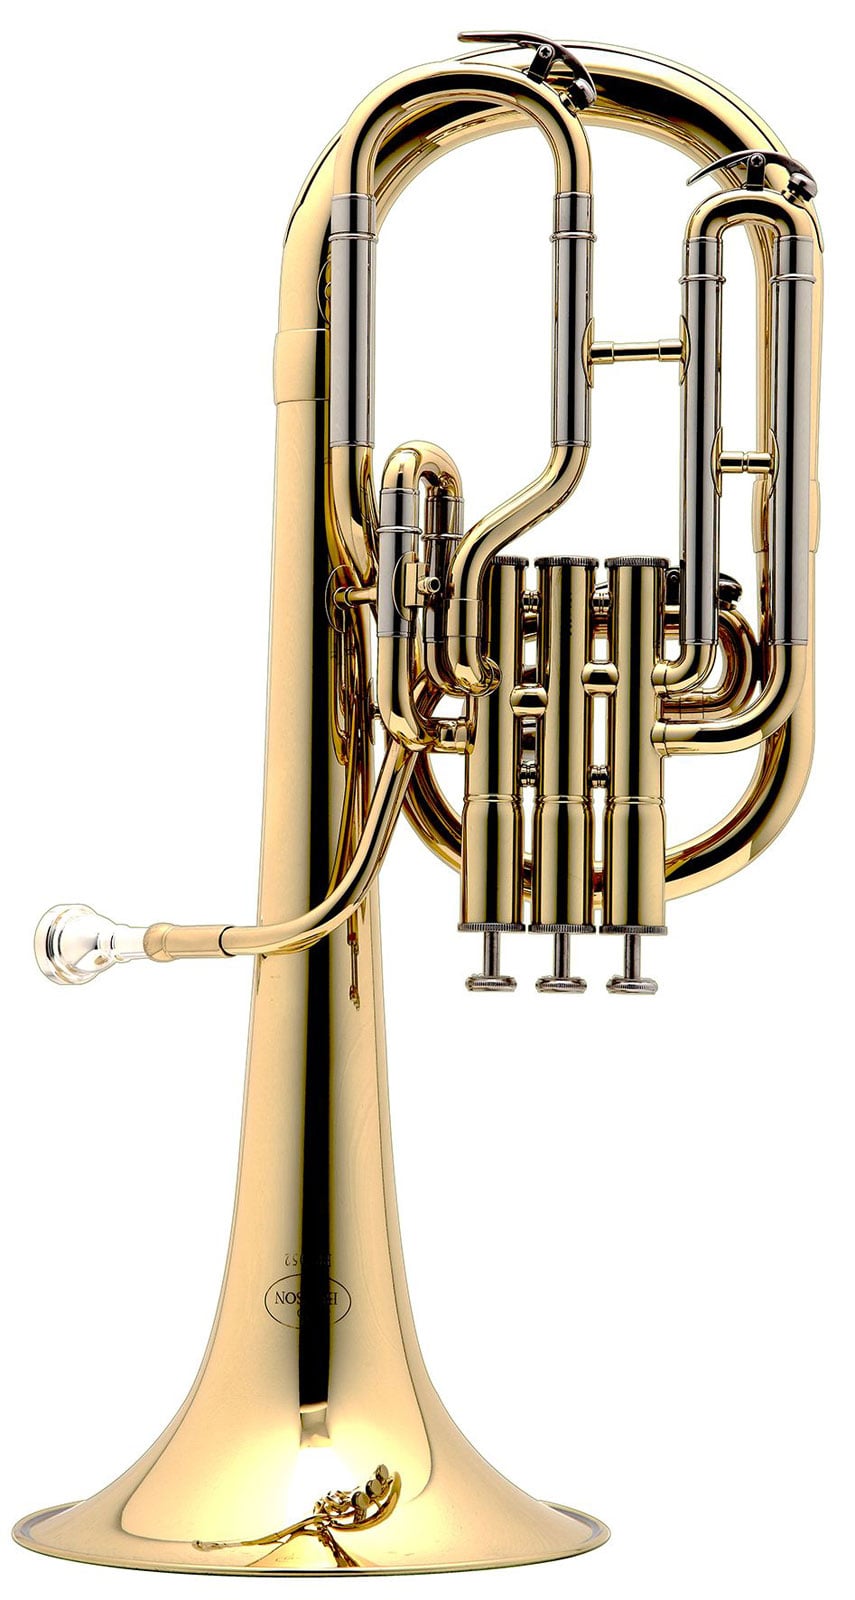 BESSON BE152-1-0 - PRODIGE Eb TENOR HORN LACQUERED